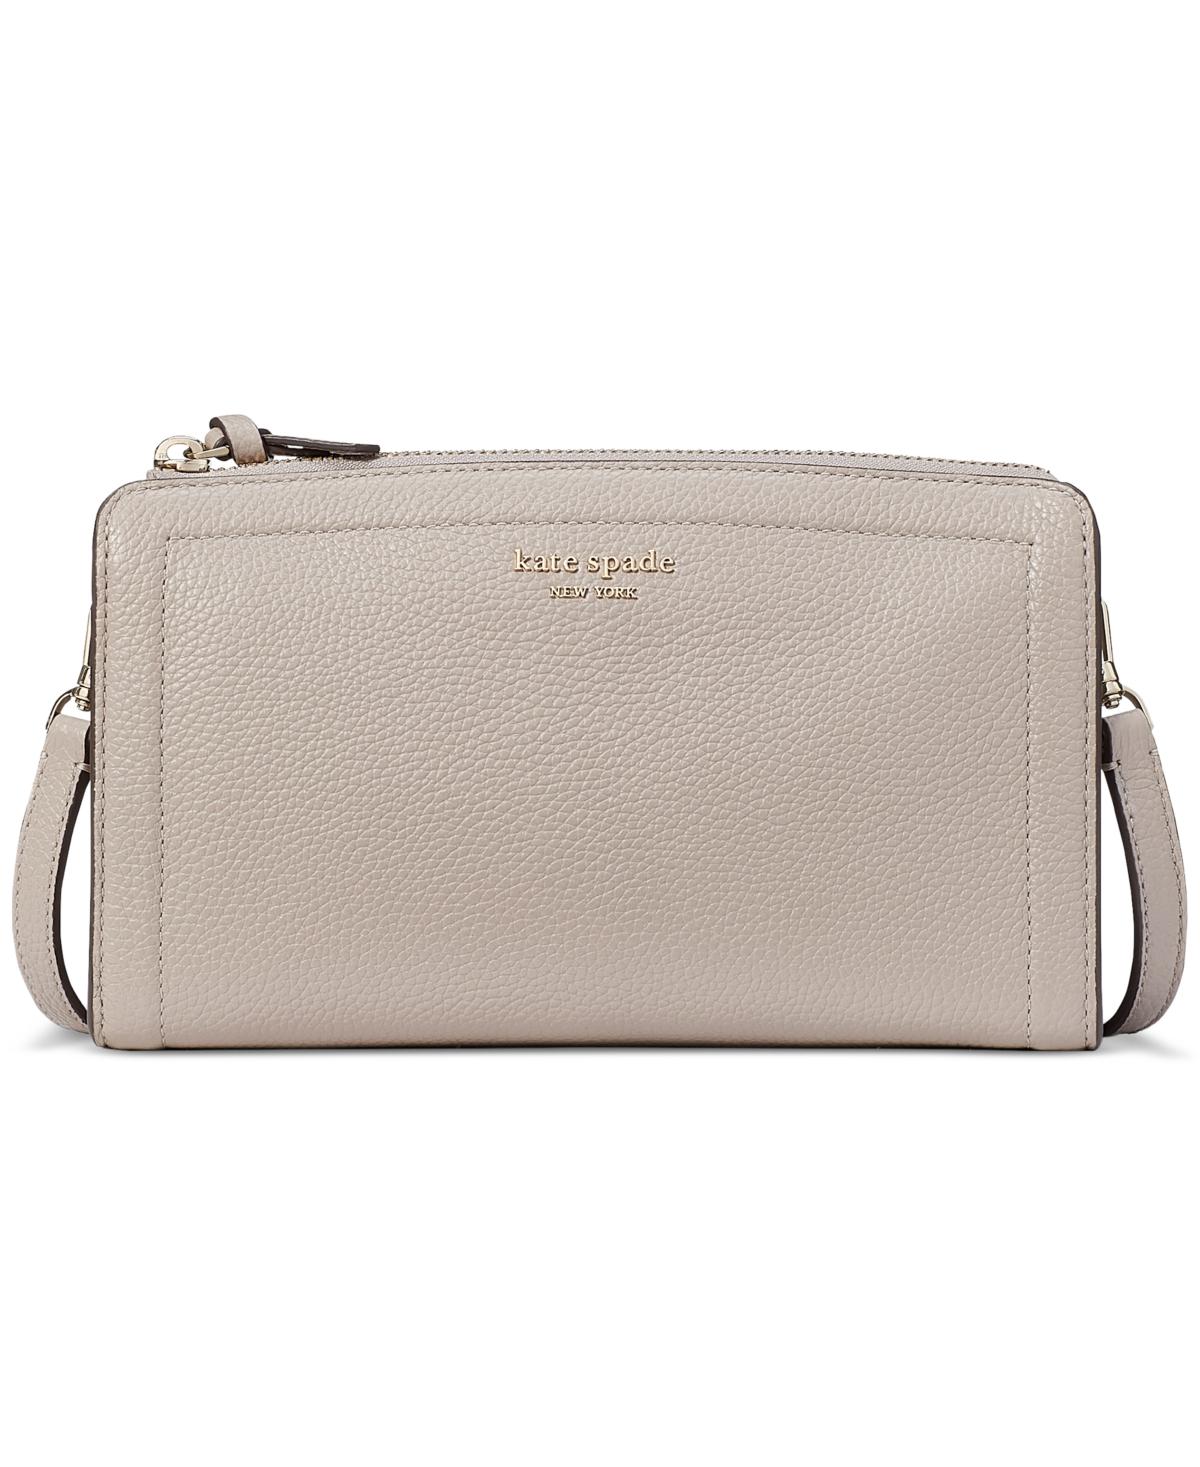 Kate Spade Knott Pebbled Leather Crossbody in Natural